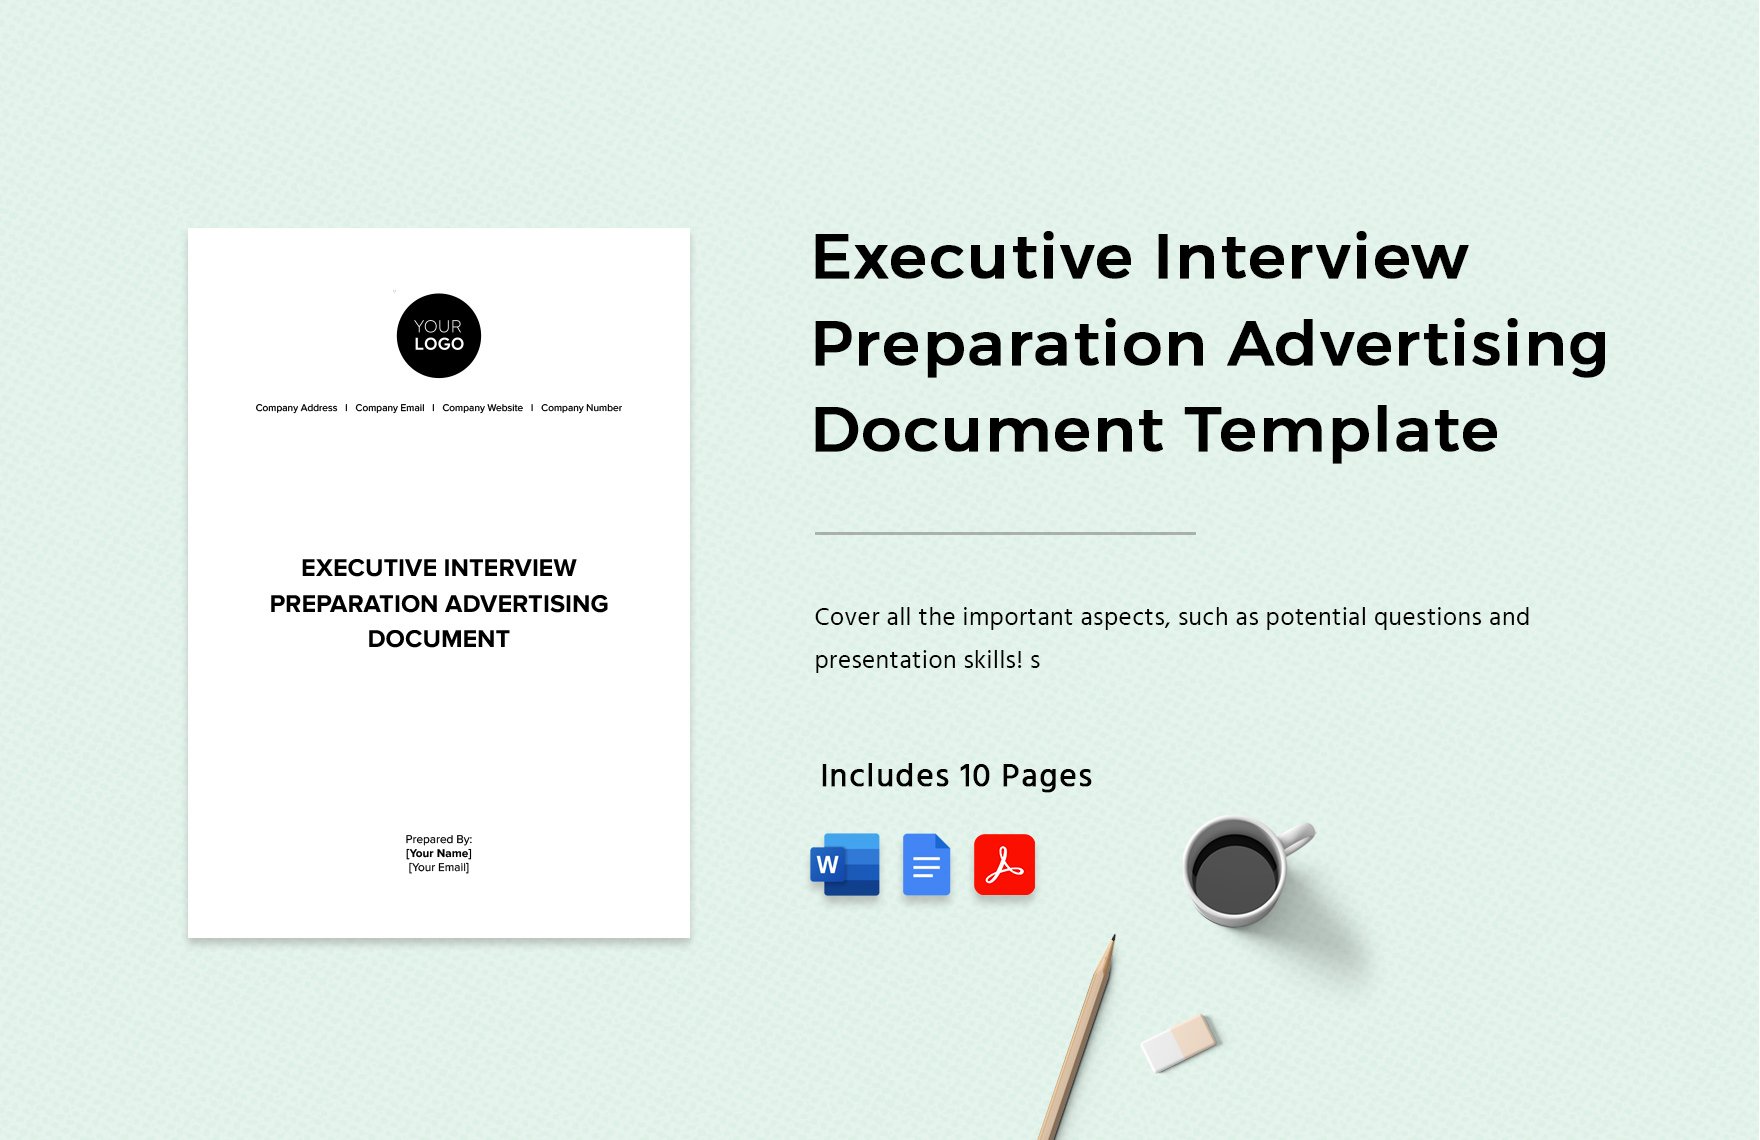 Executive Interview Preparation Advertising Document Template in Word, Google Docs, PDF